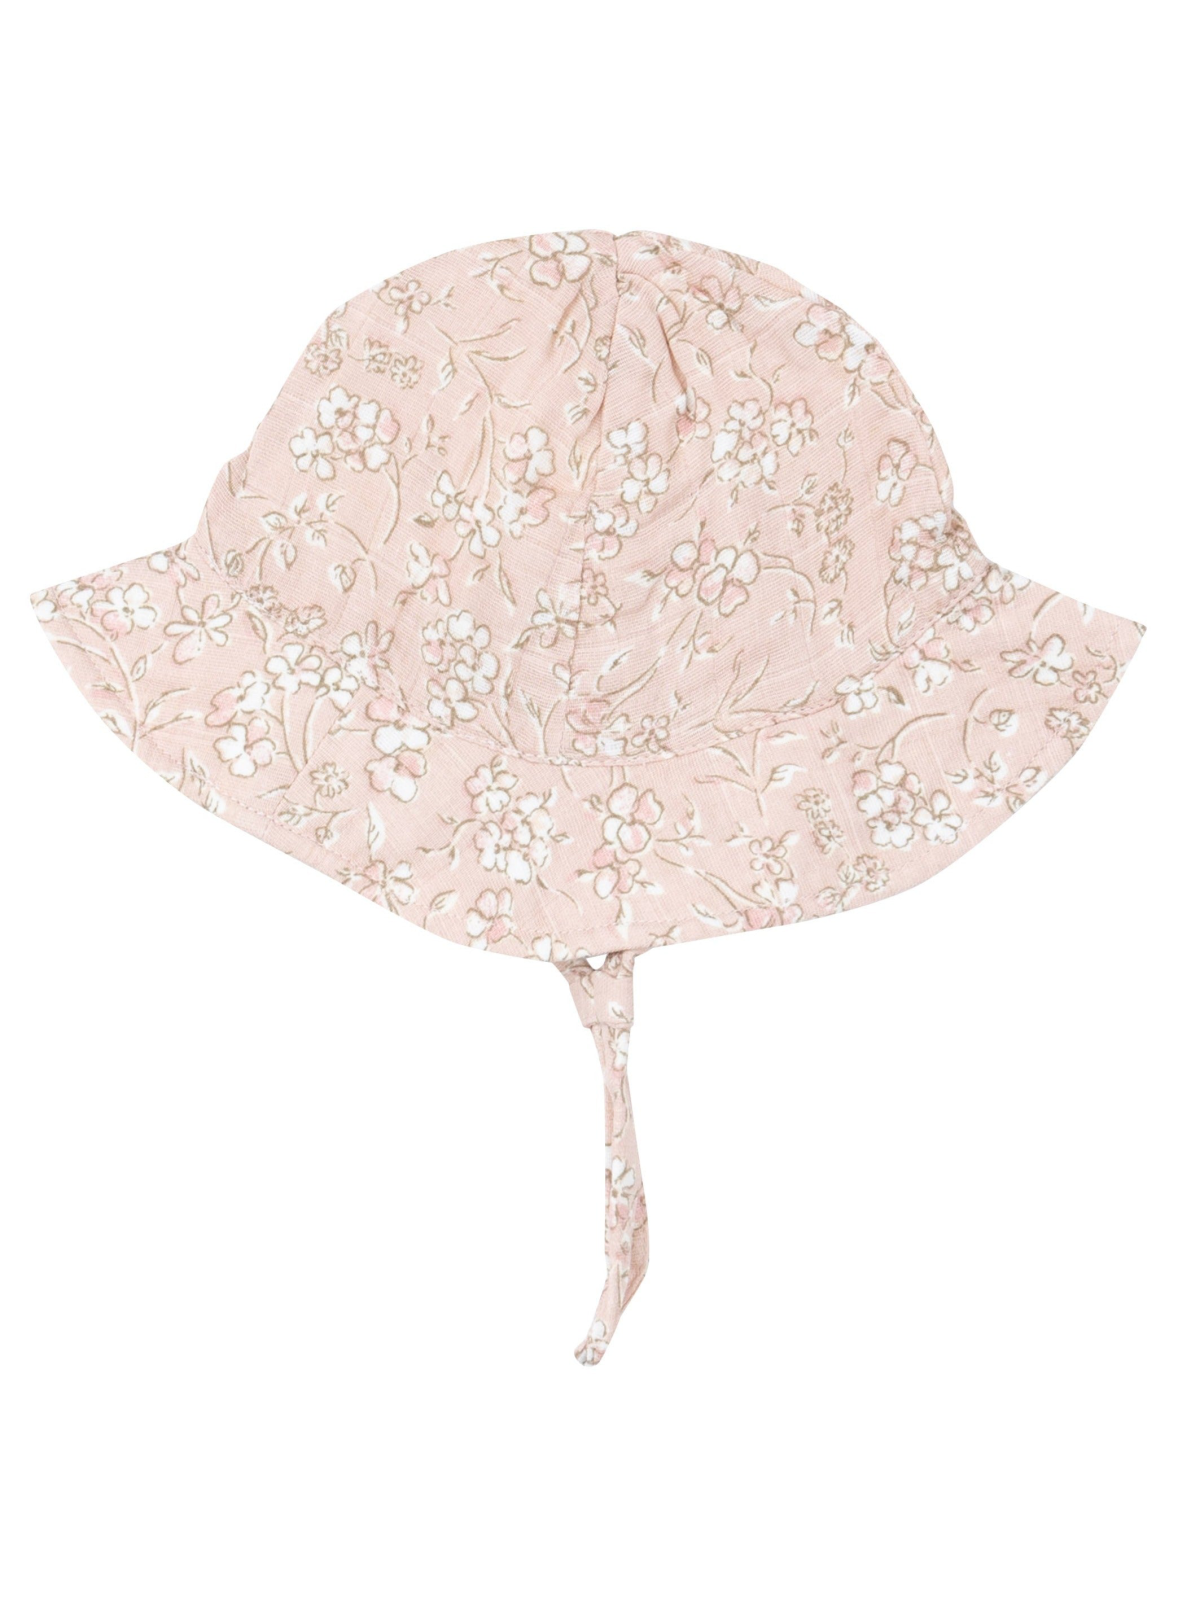 Sunhat, Baby's Breath Floral